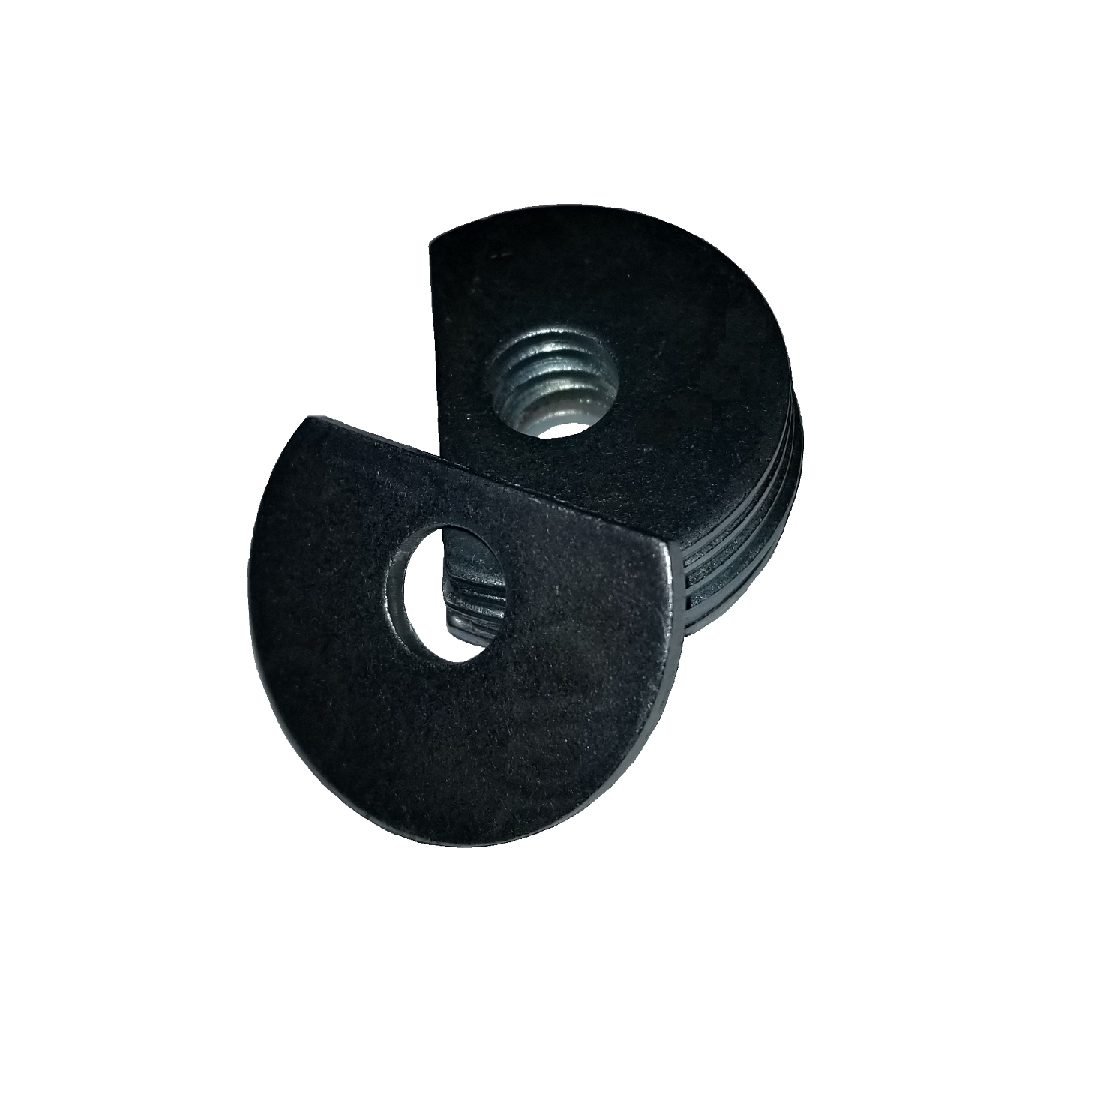 Clipped OD Washer - 0.188 ID, 0.438 OD, 0.098 Thick, Copper